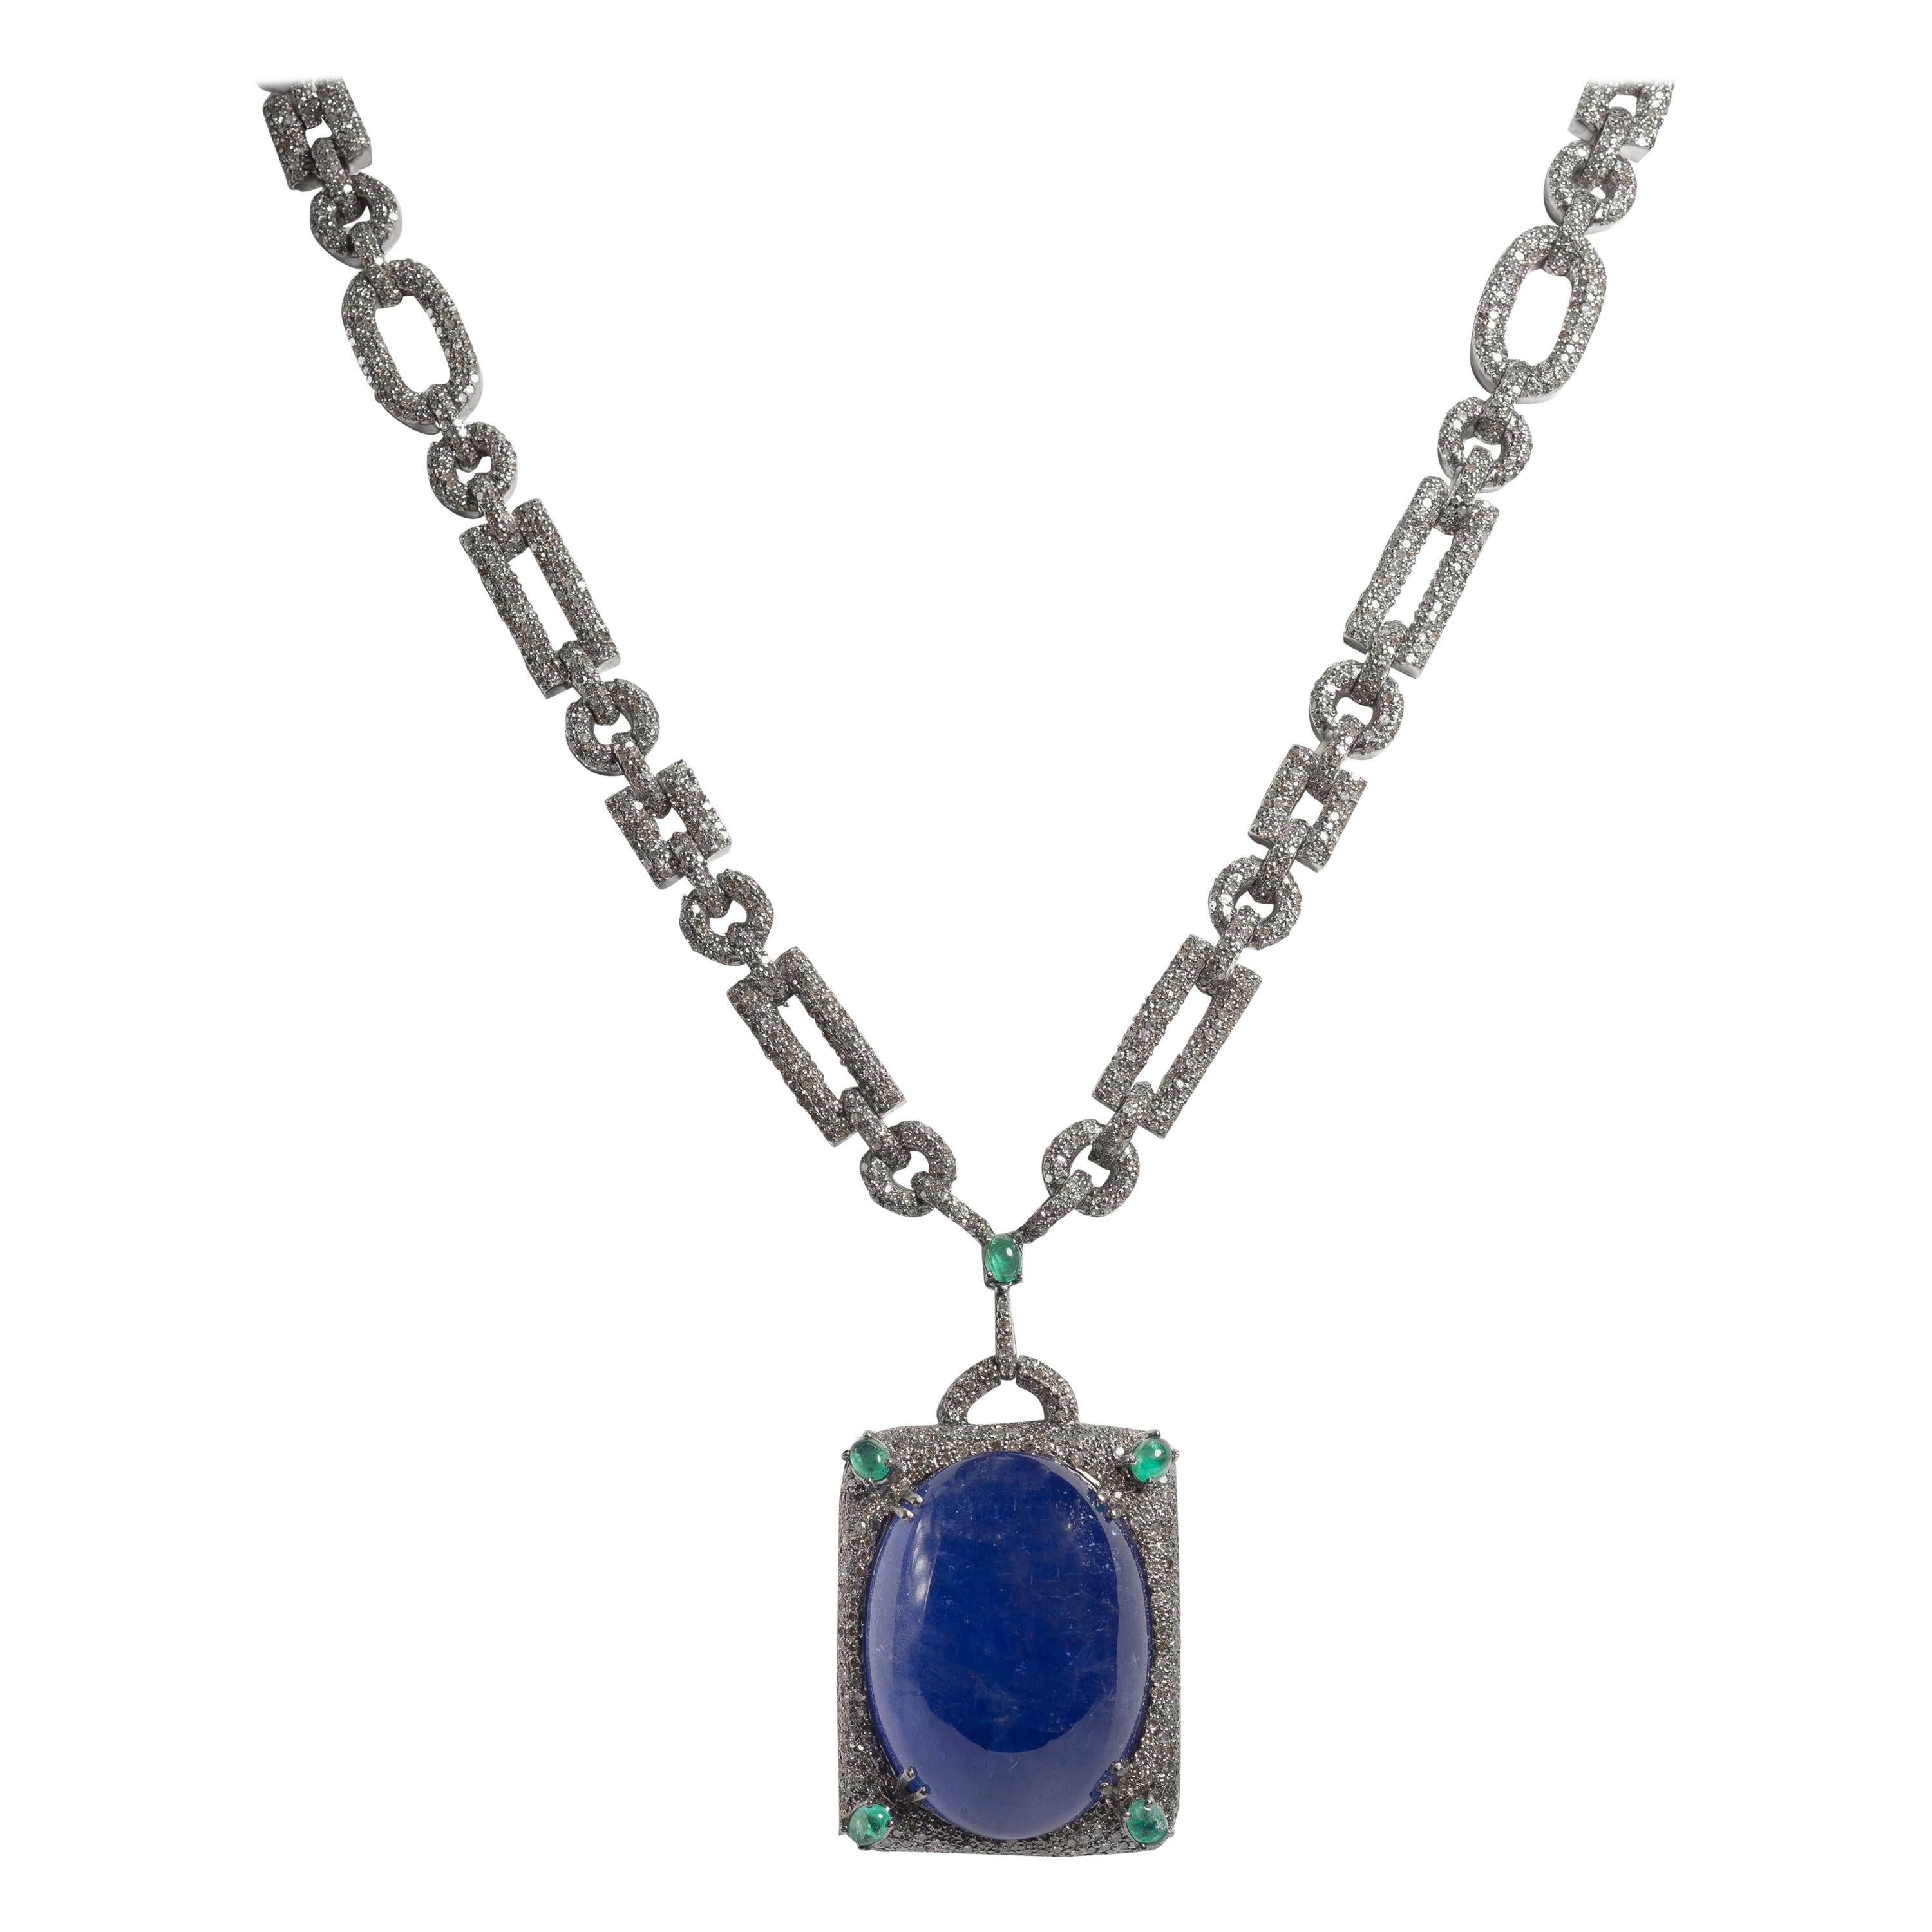 Art Deco Style Large 105 Carat Cabochon Tanzanite Diamond Emerald Long Necklace 
Wonderful 28 inch long necklace sautoir comprising a 105 carat Tanzanite cabochon set with 17.89carats soft grey diamonds accented with 0.61 carats emeralds set in